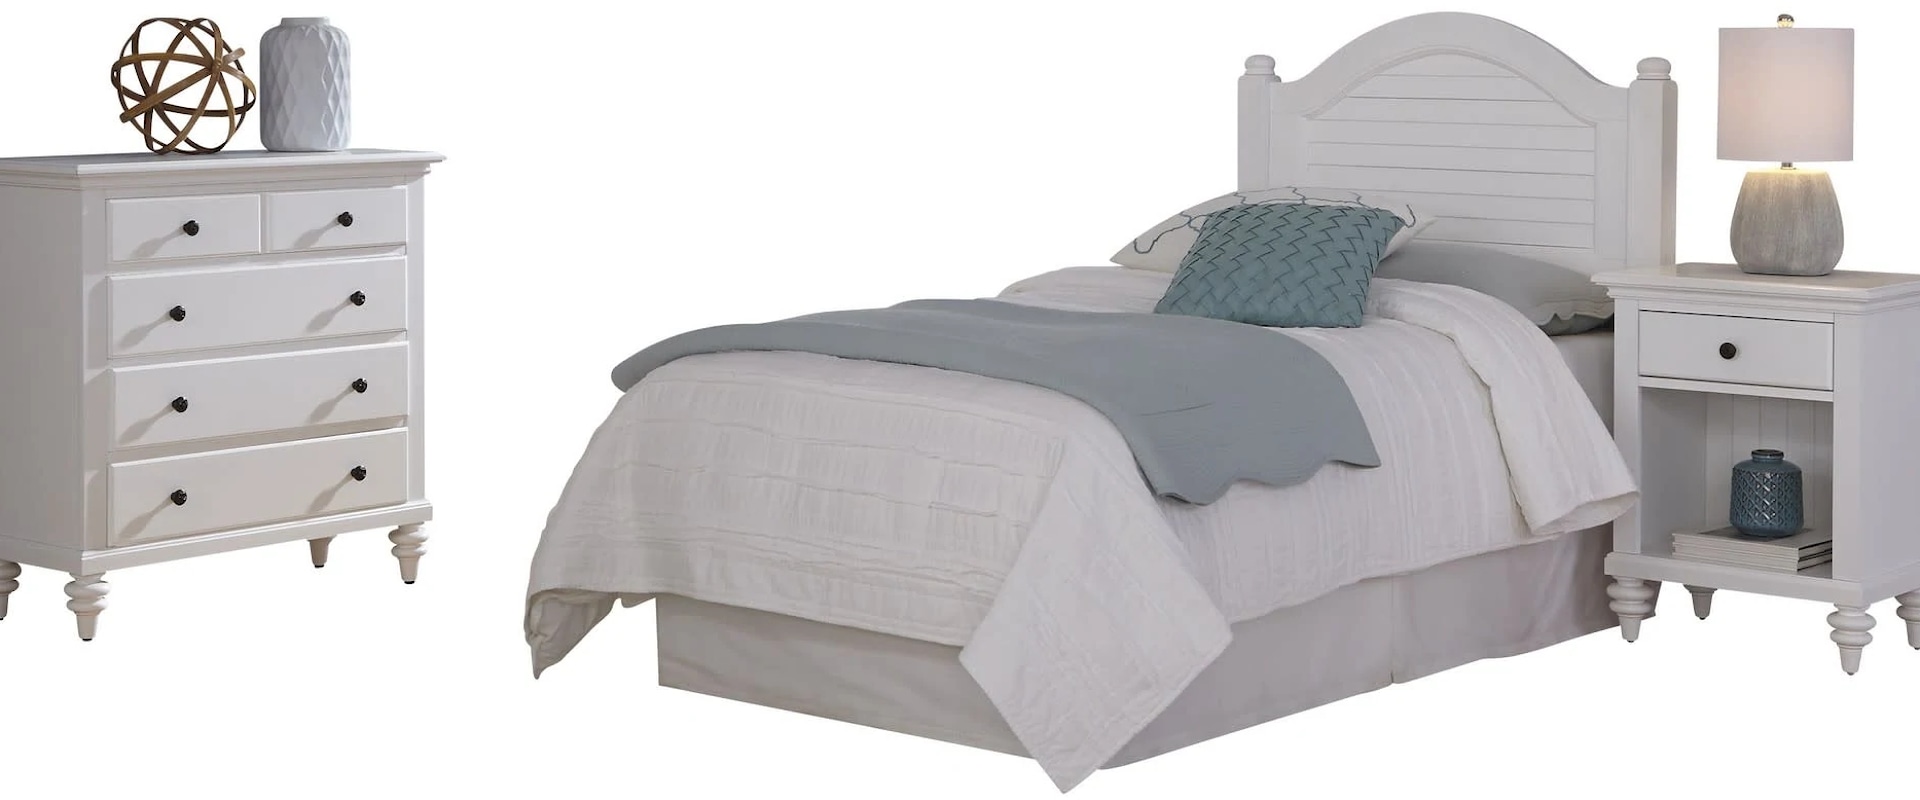 Coastal 3 Piece Twin Bedroom Set with Off-White Finish